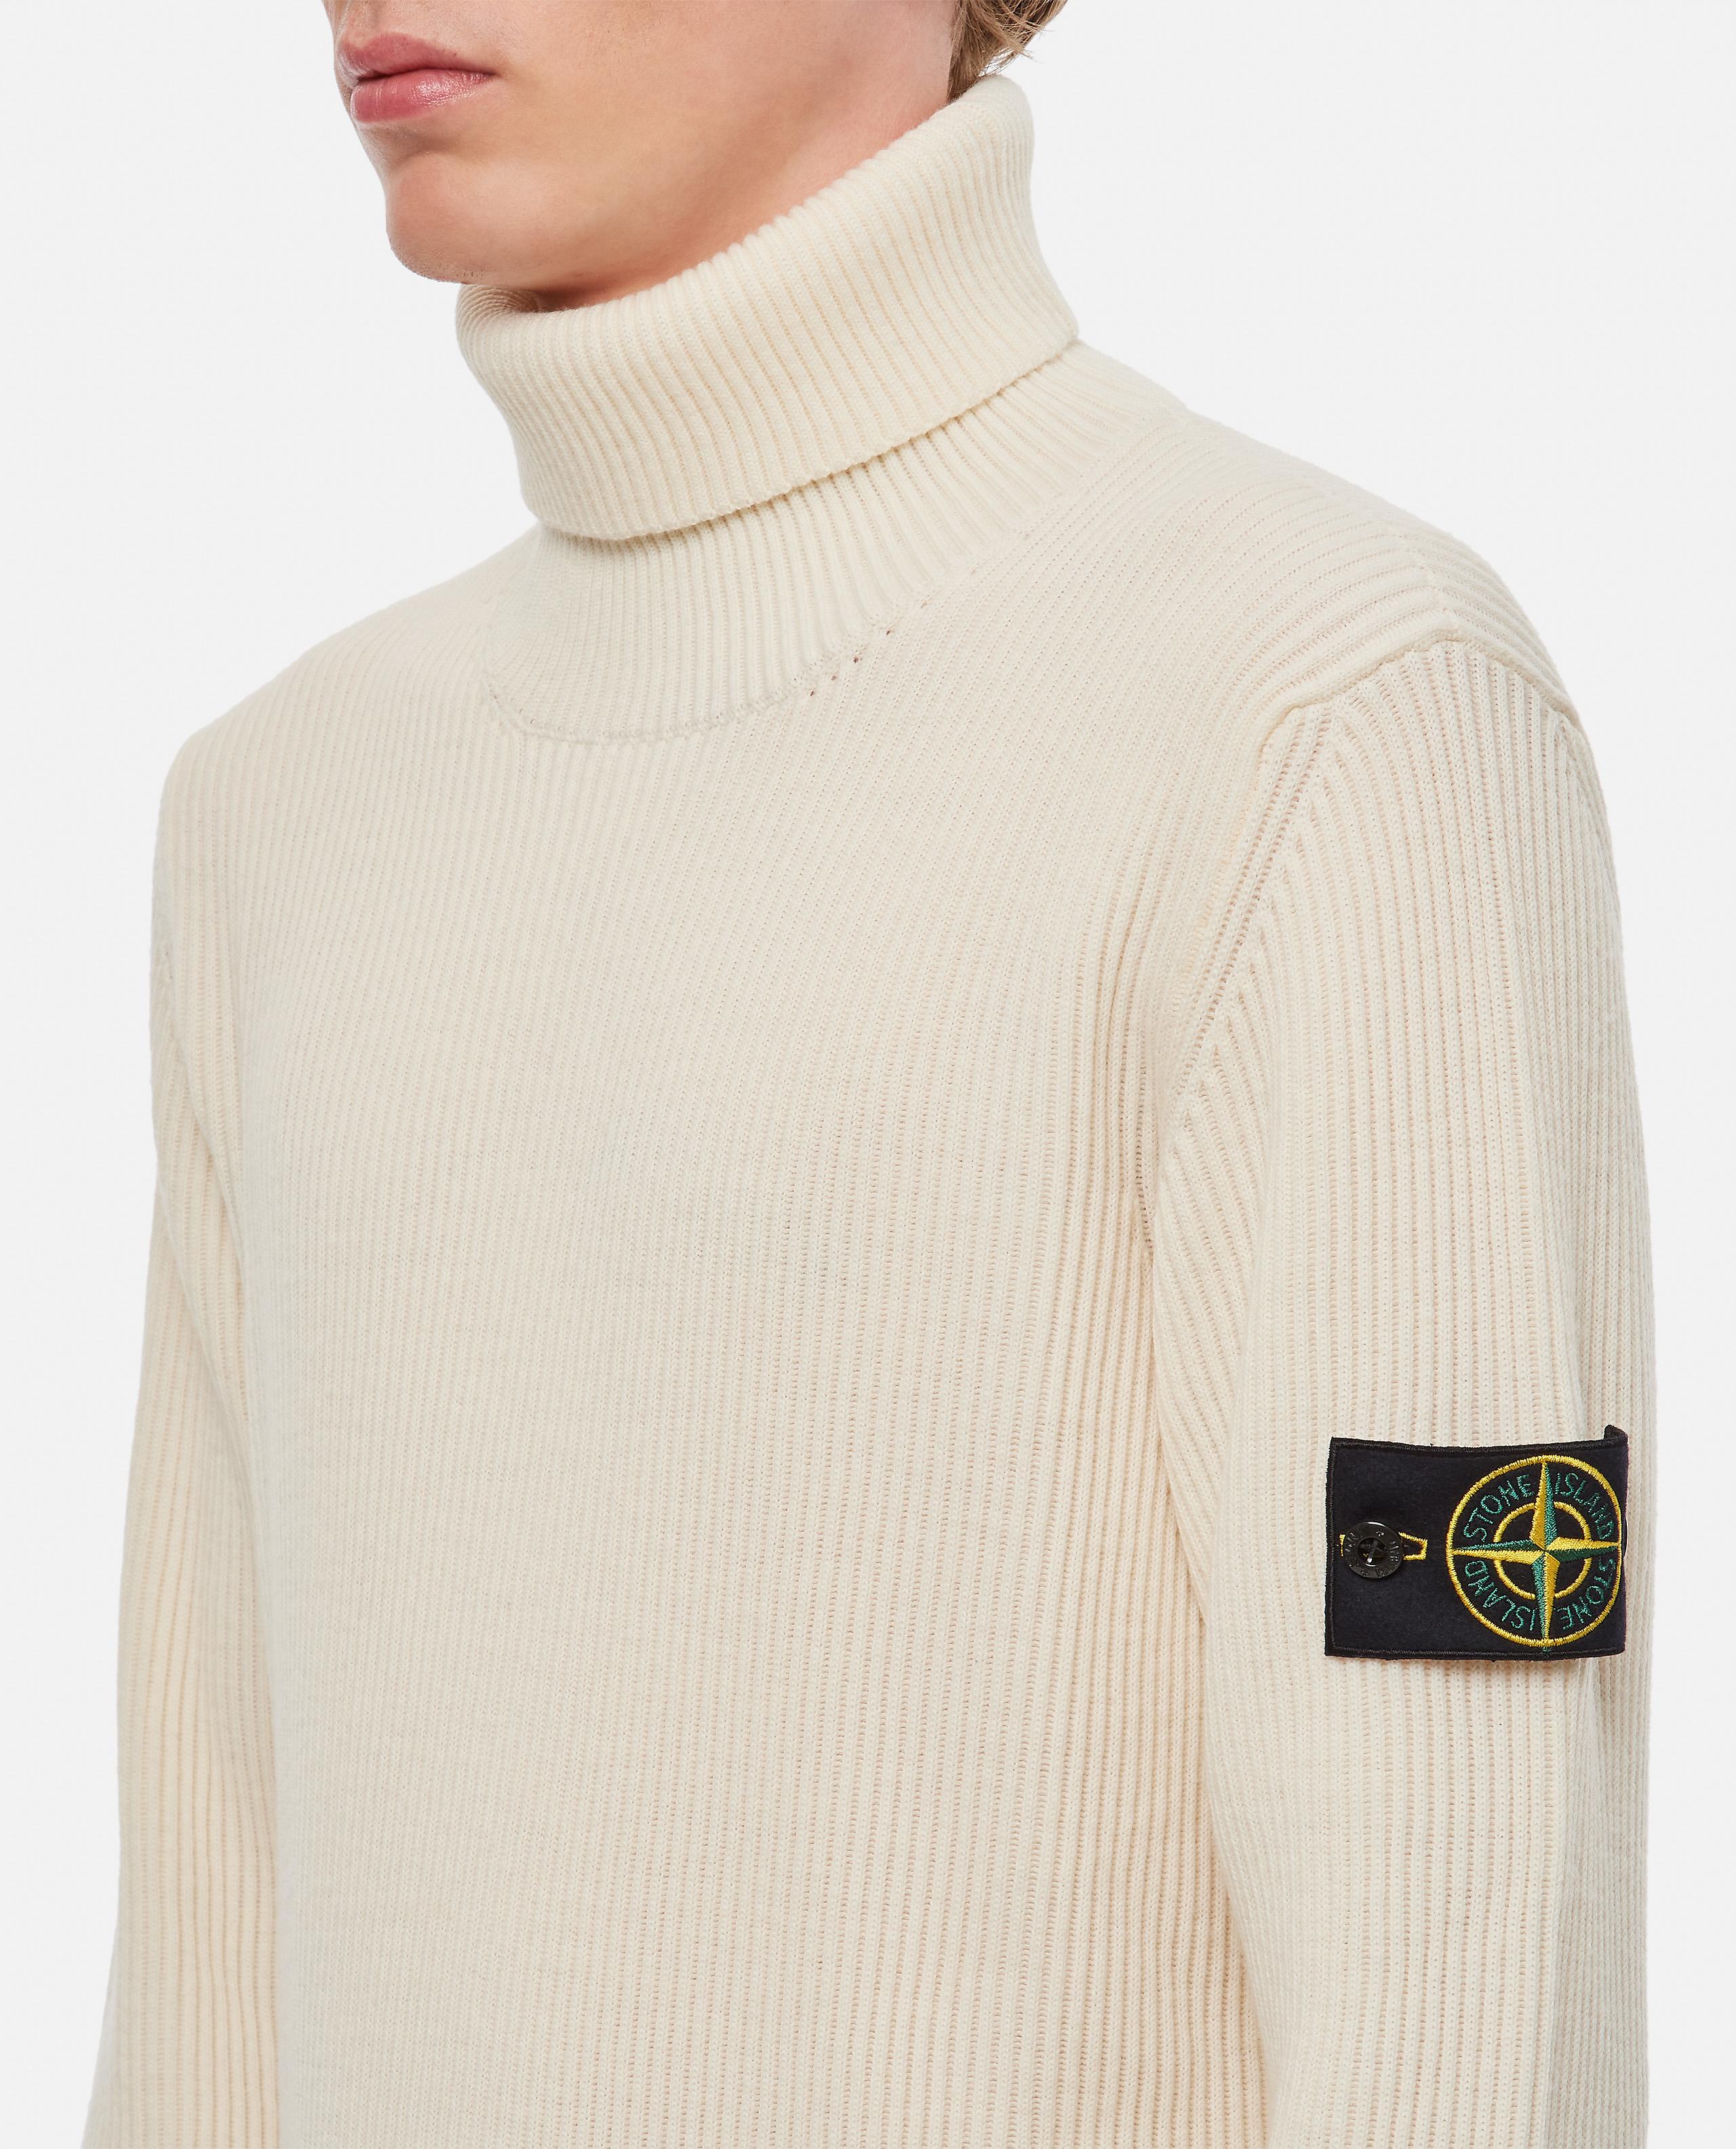 Stone Island Wool Turtleneck in Natural for Men | Lyst